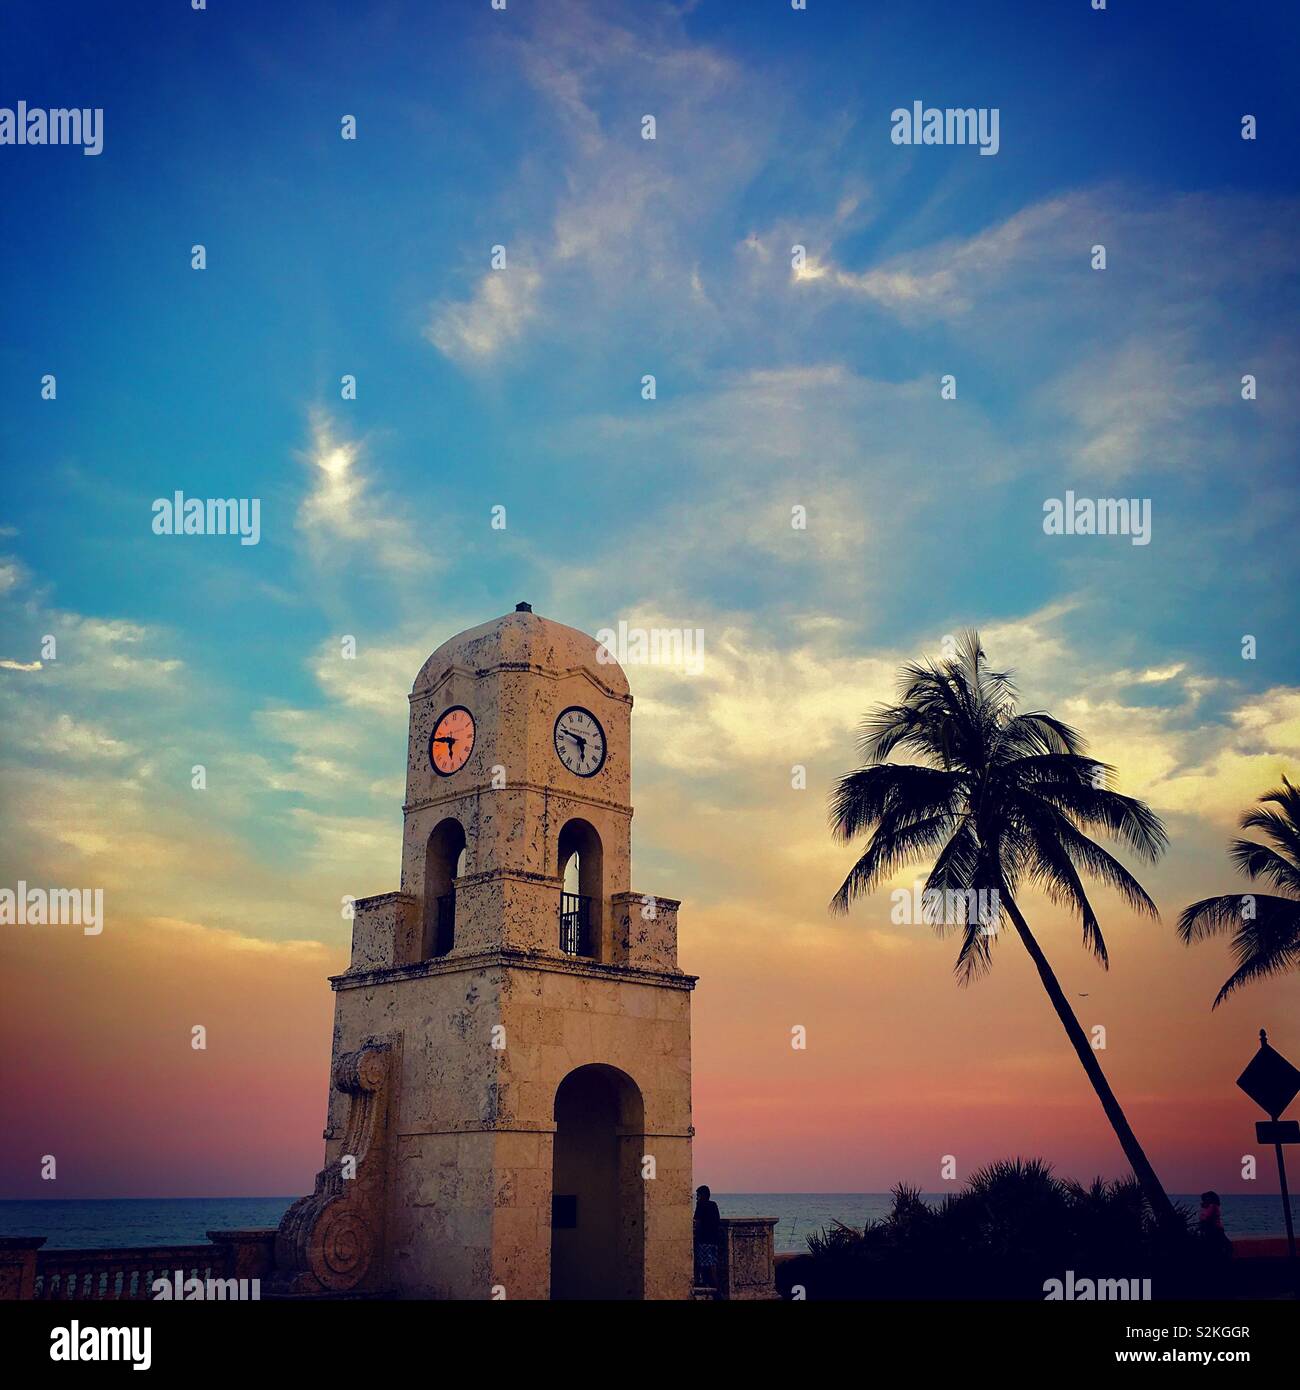 627 Palm Beach Clock Tower Images, Stock Photos, 3D objects